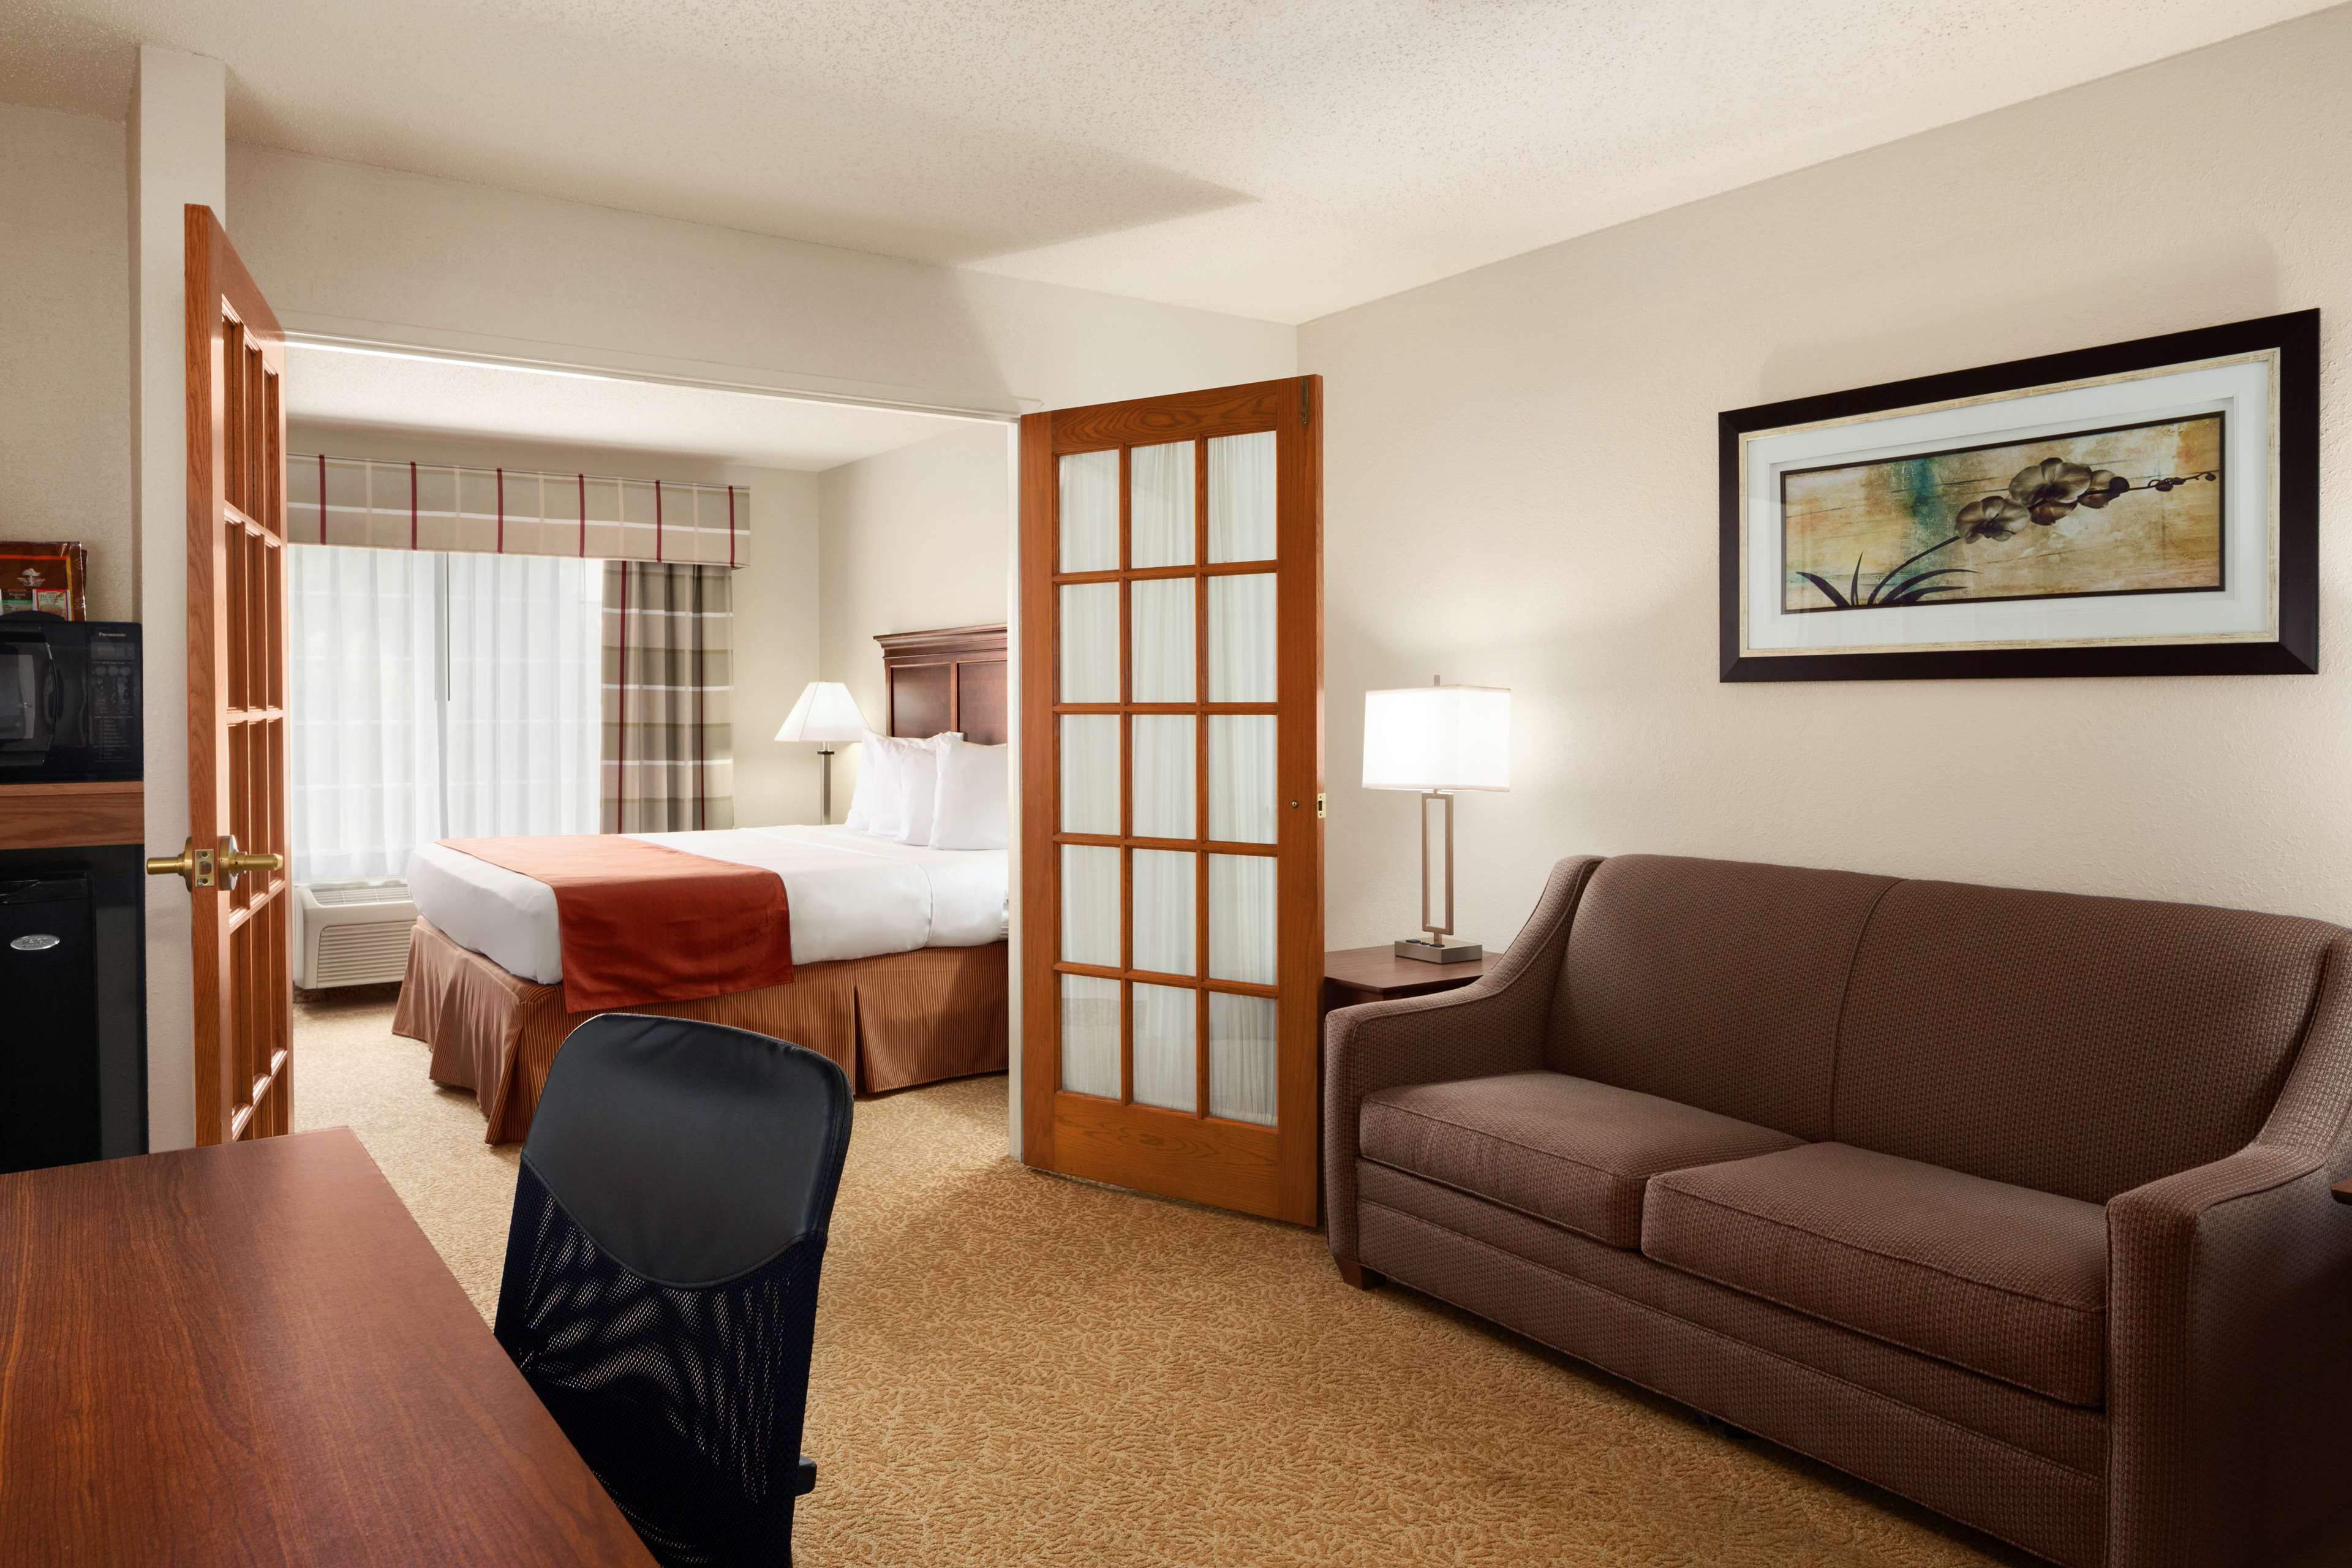 Country Inn & Suites by Radisson, Grand Rapids Airport, MI Photo